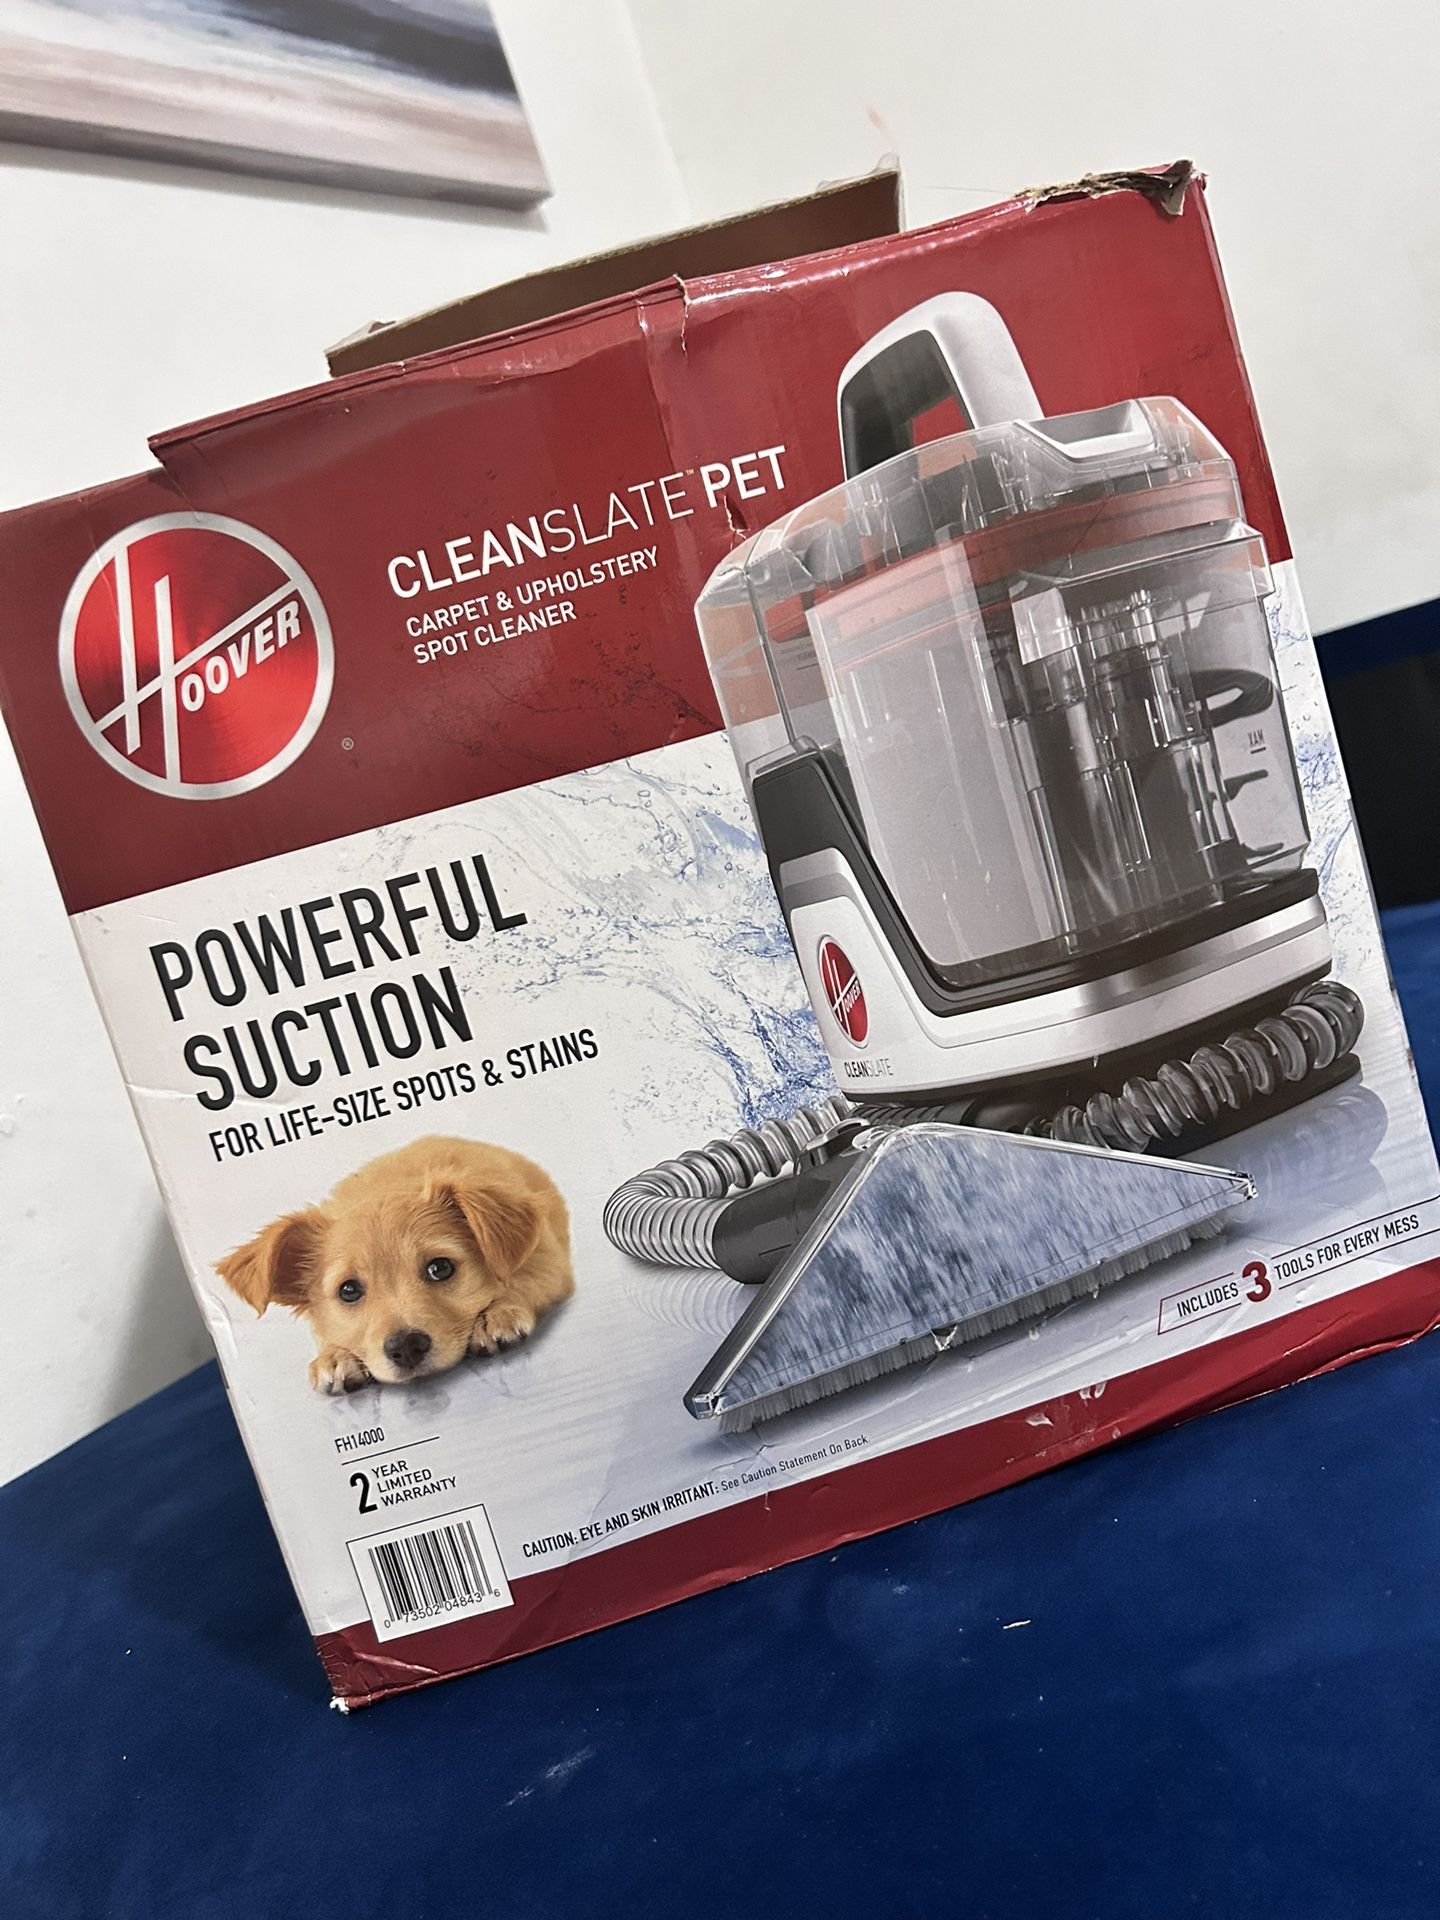 Hoover Cleanslate Pet Carpet & Upholstery Spot Cleaner 